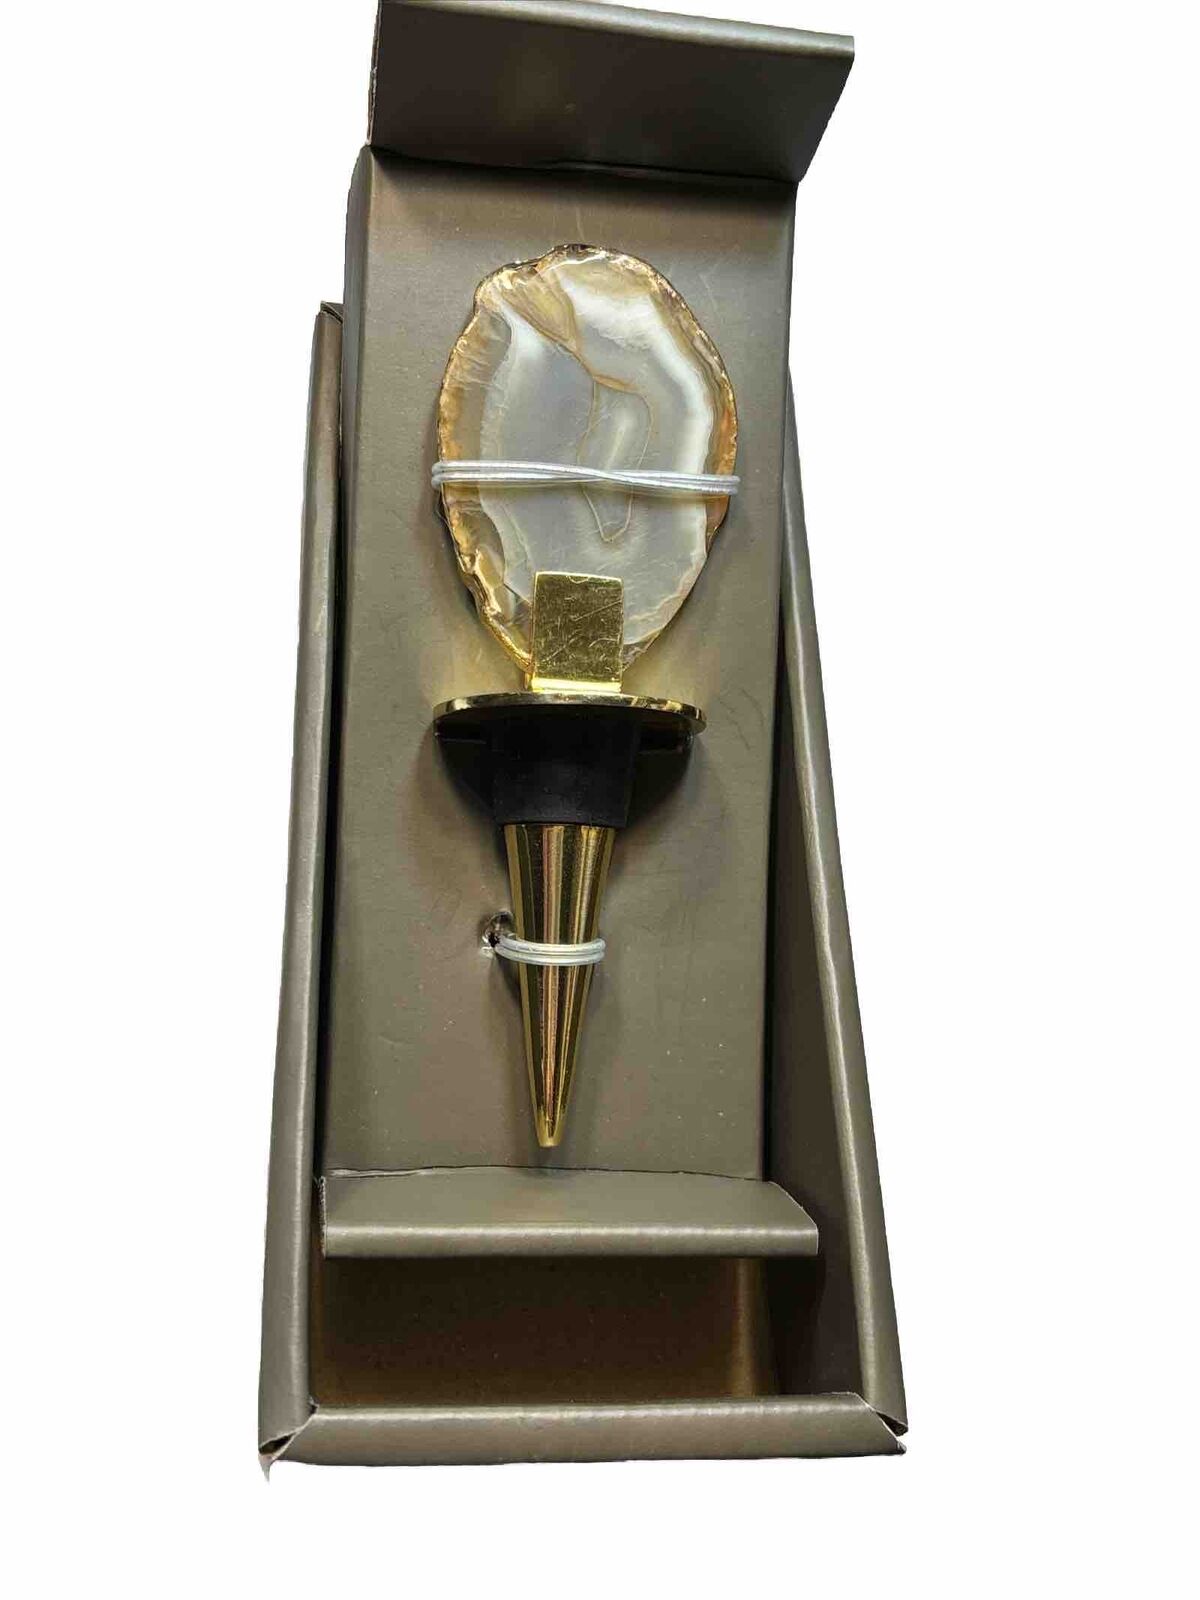 New New In Box Agate Sliced Stone Wine Bottle Stopper Grey Gold Brown GIFT Sexy